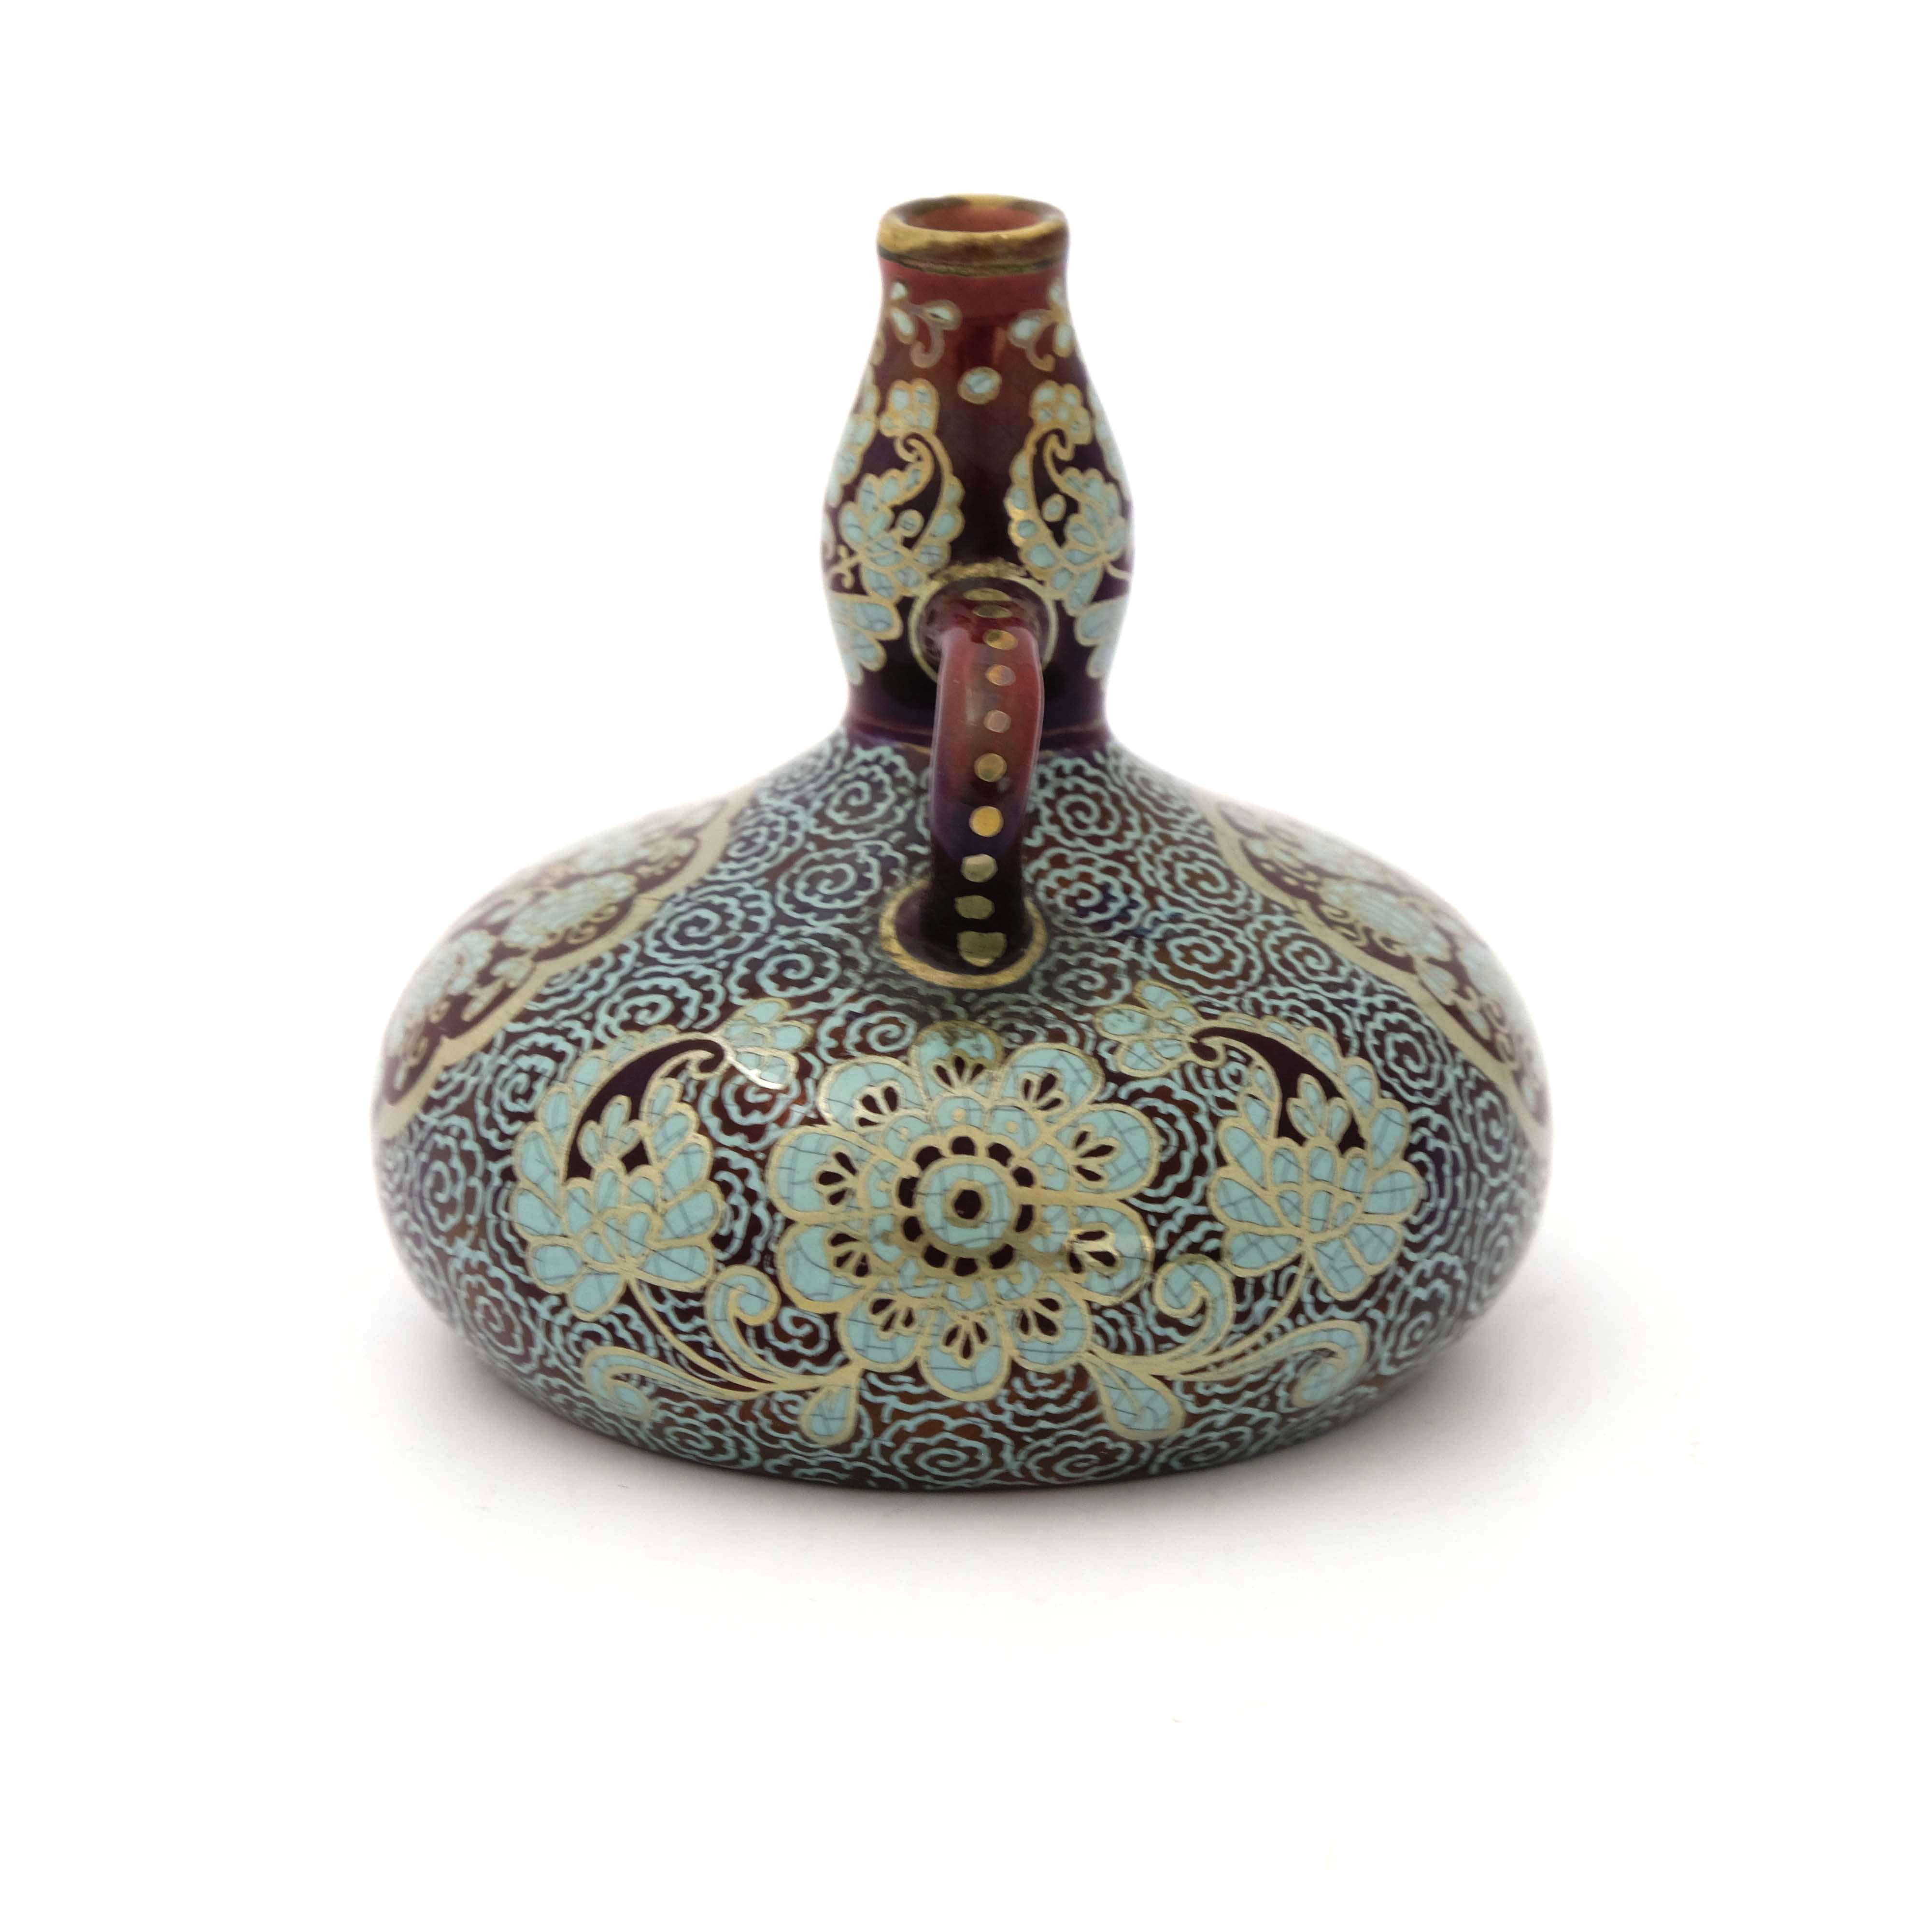 Zsolnay, Pecs, a miniature lustre vase - Image 4 of 5